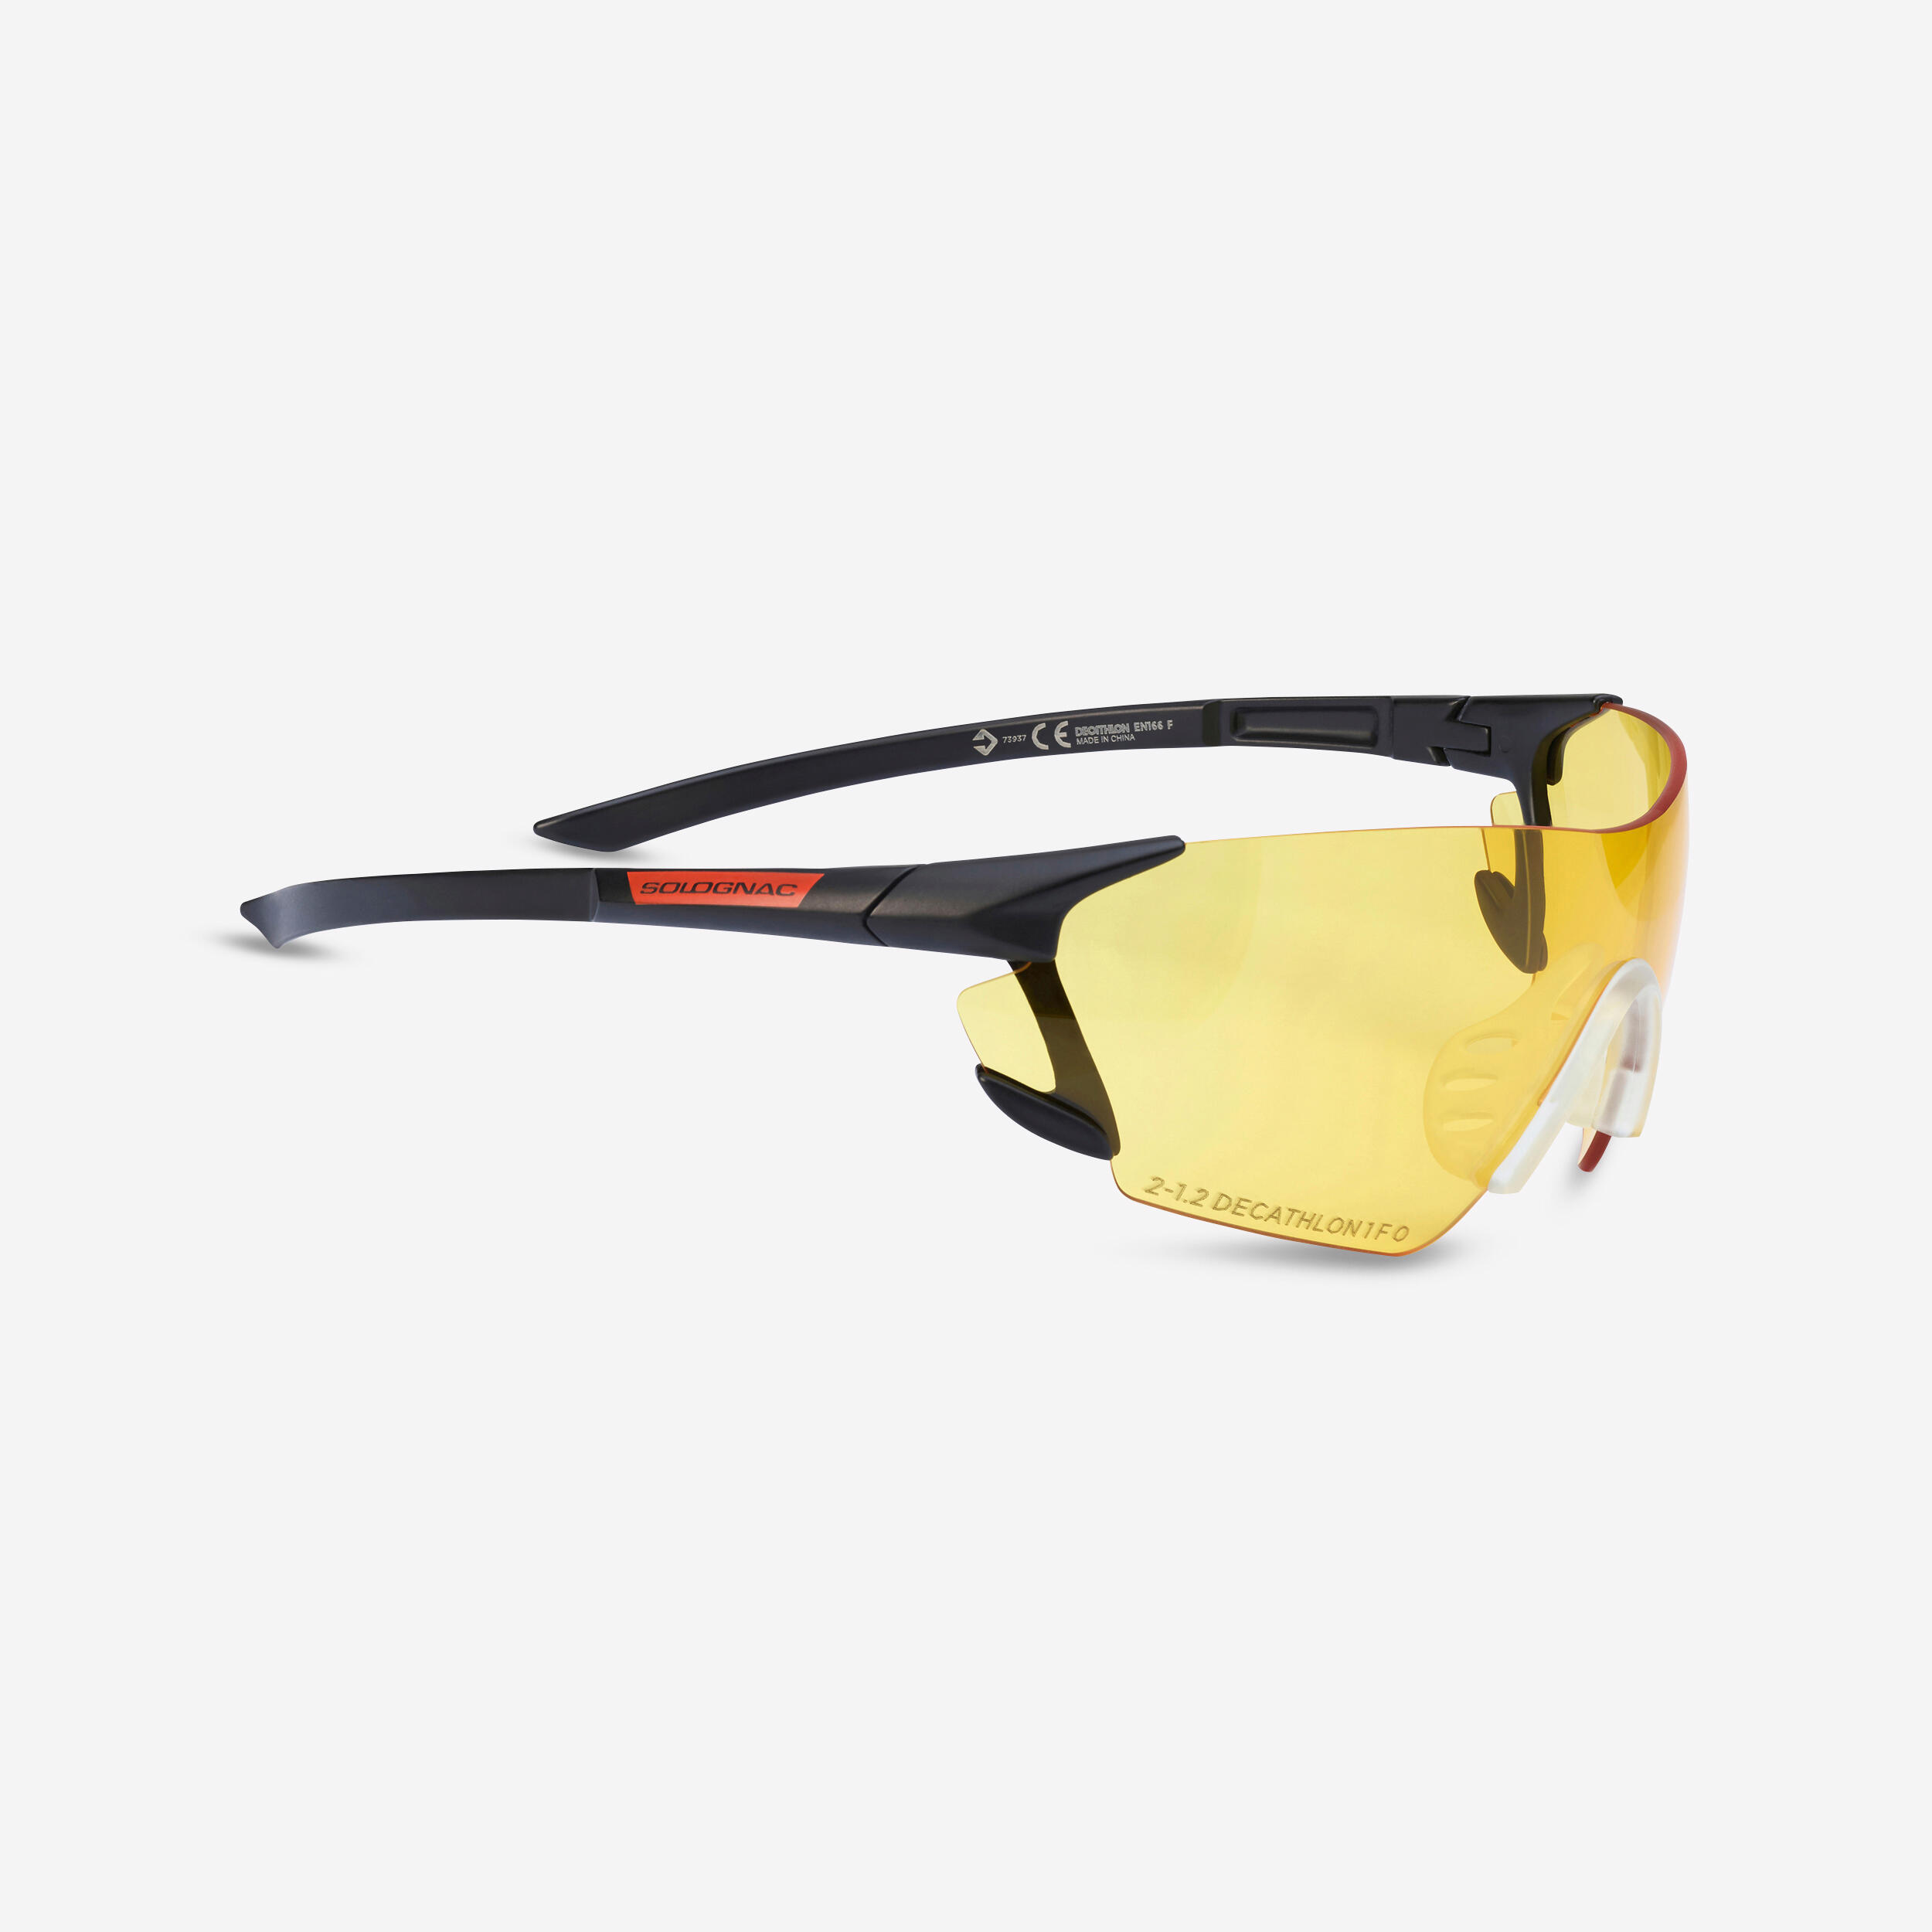 SOLOGNAC CLAY PIGEON SHOOTING PROTECTIVE GLASSES 100, YELLOW STRONG LENSES, CATEGORY 1